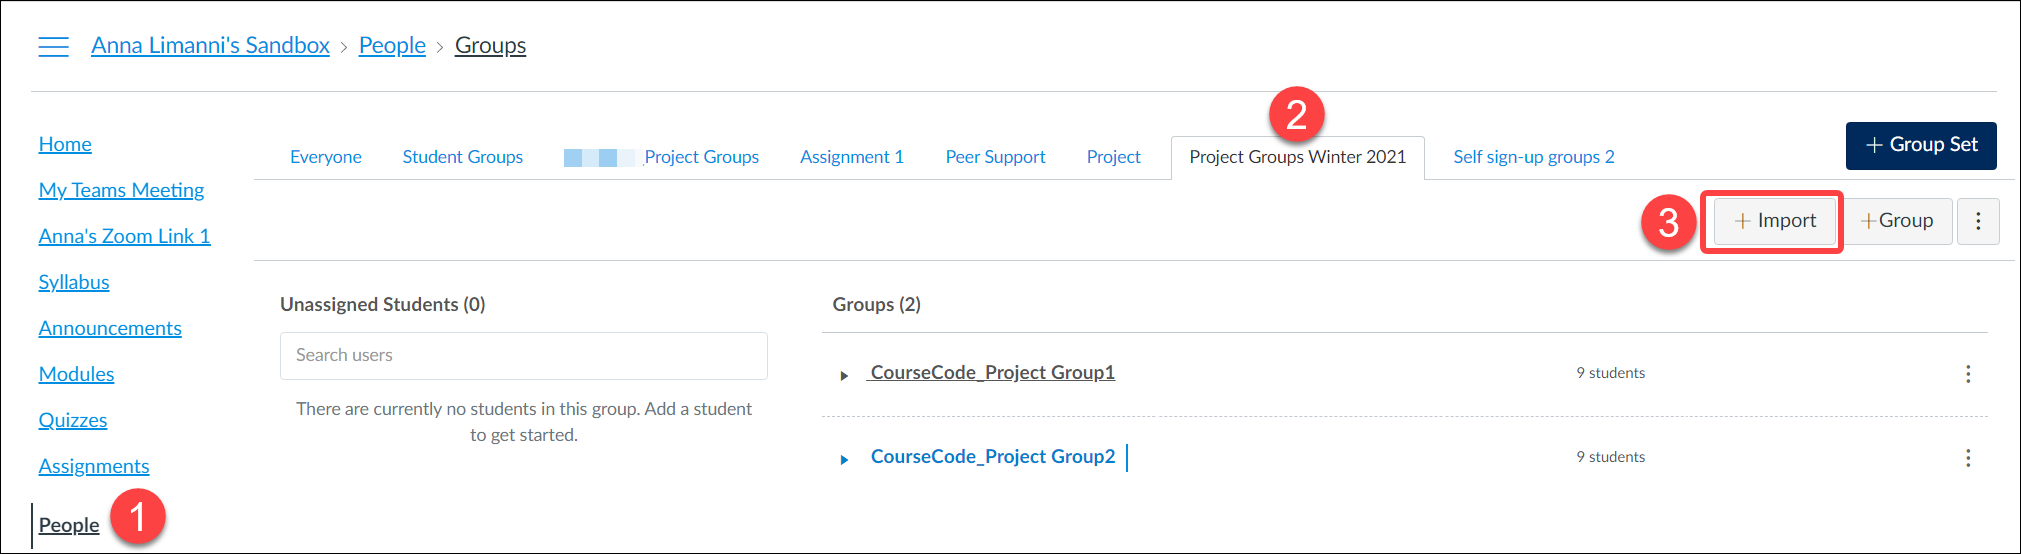 Screenshot of Quercus People page showing a group set called Project Groups 2021 and its associated 2 group selected